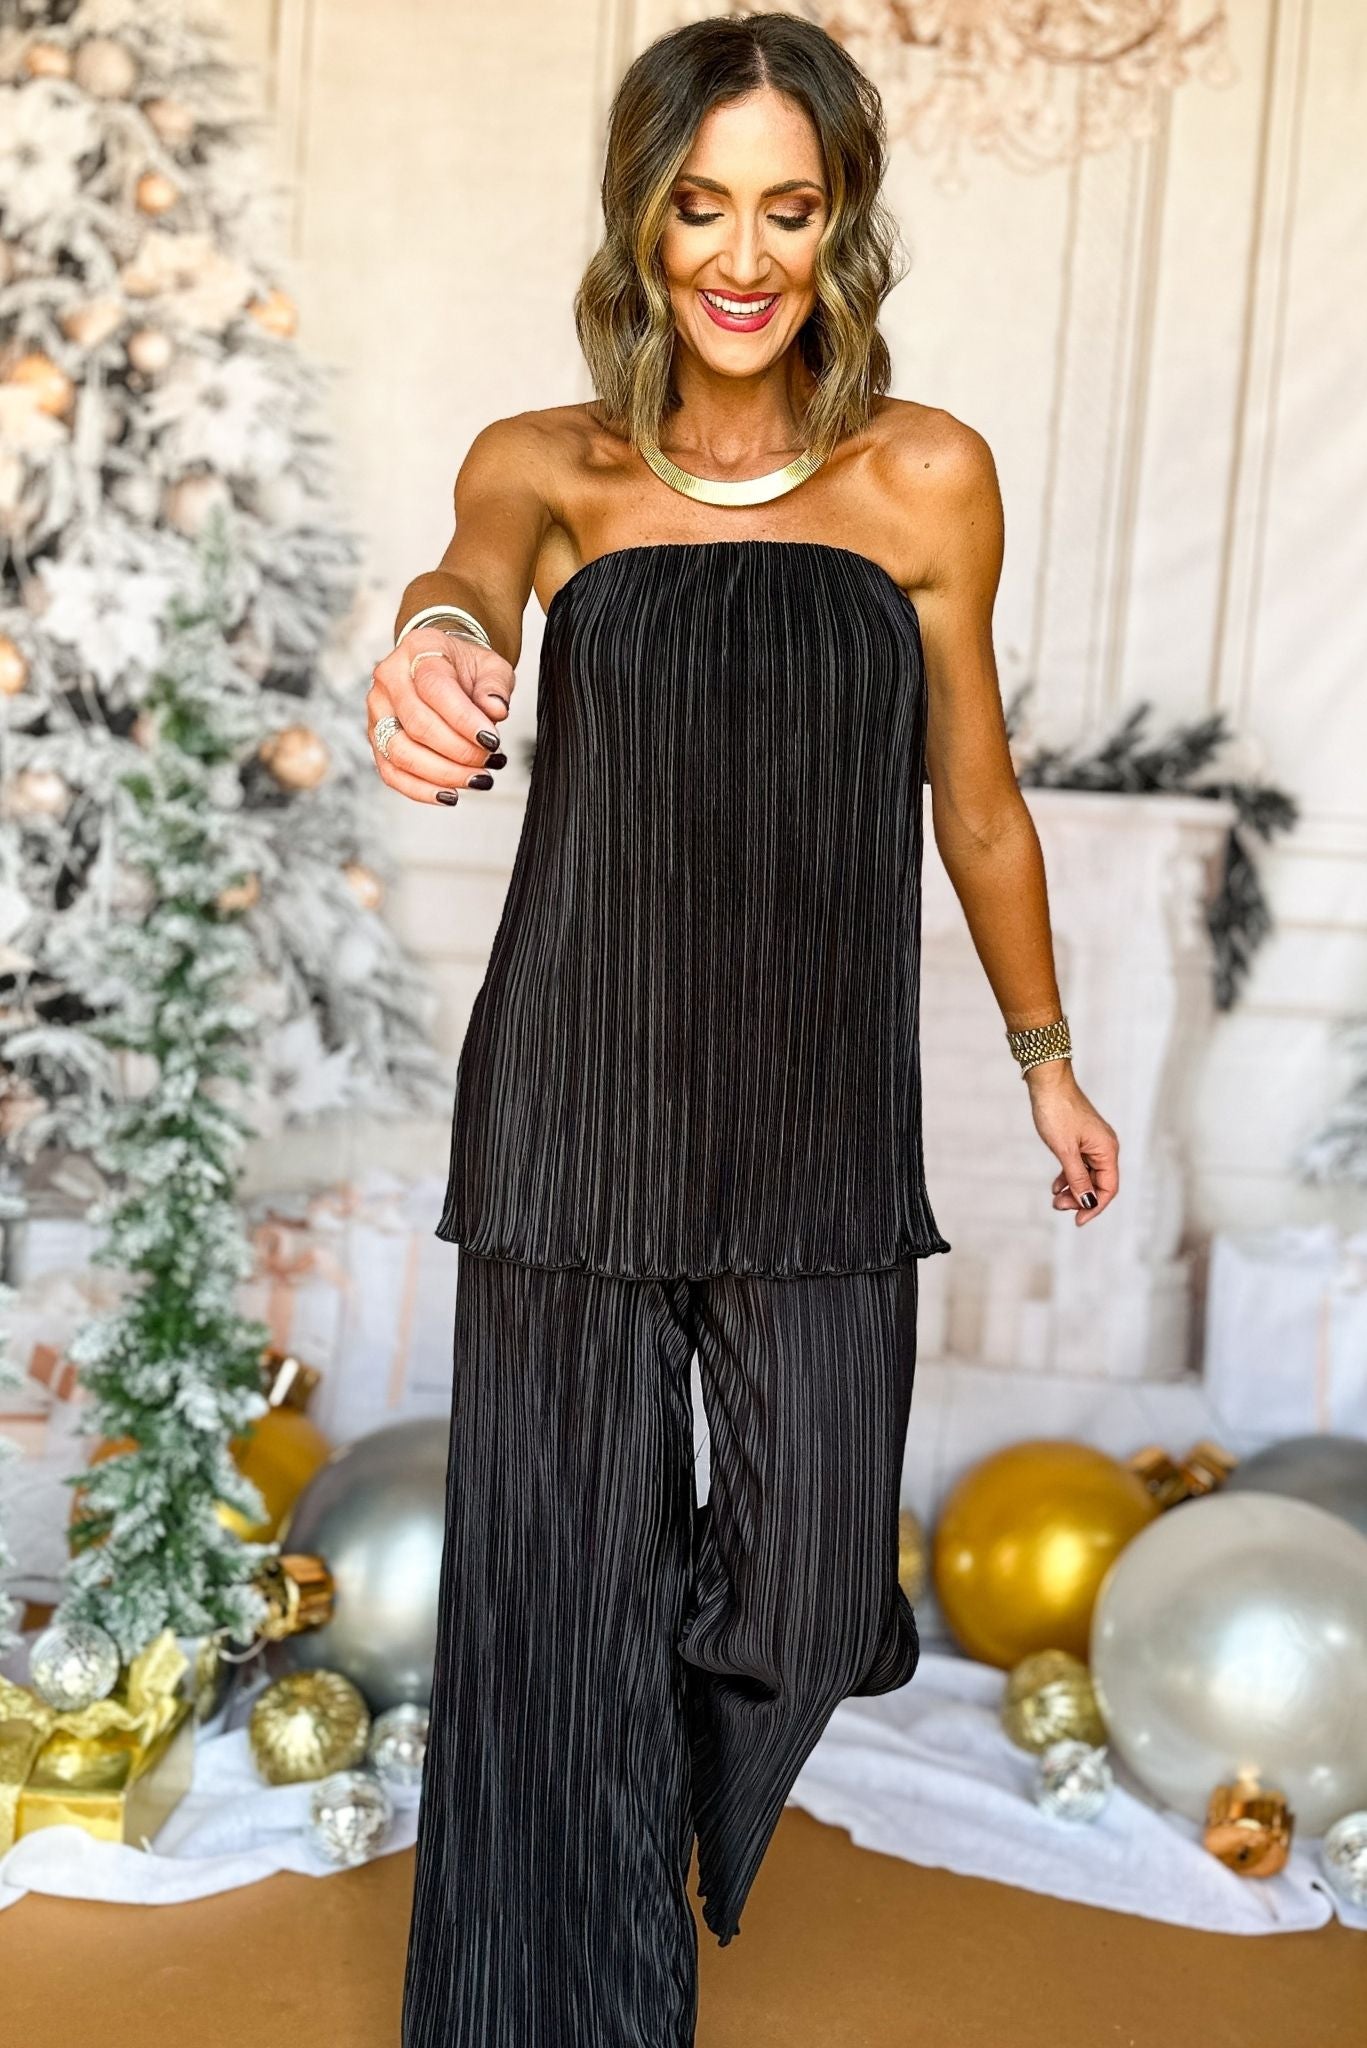 SSYS The Scarlet Set In Black, must have set, must have style, must have holiday, elevated set, matching set, elevated style, elevated holiday, holiday fashion, holiday set, mom style, holiday style, shop style your senses by mallory fitzsimmons